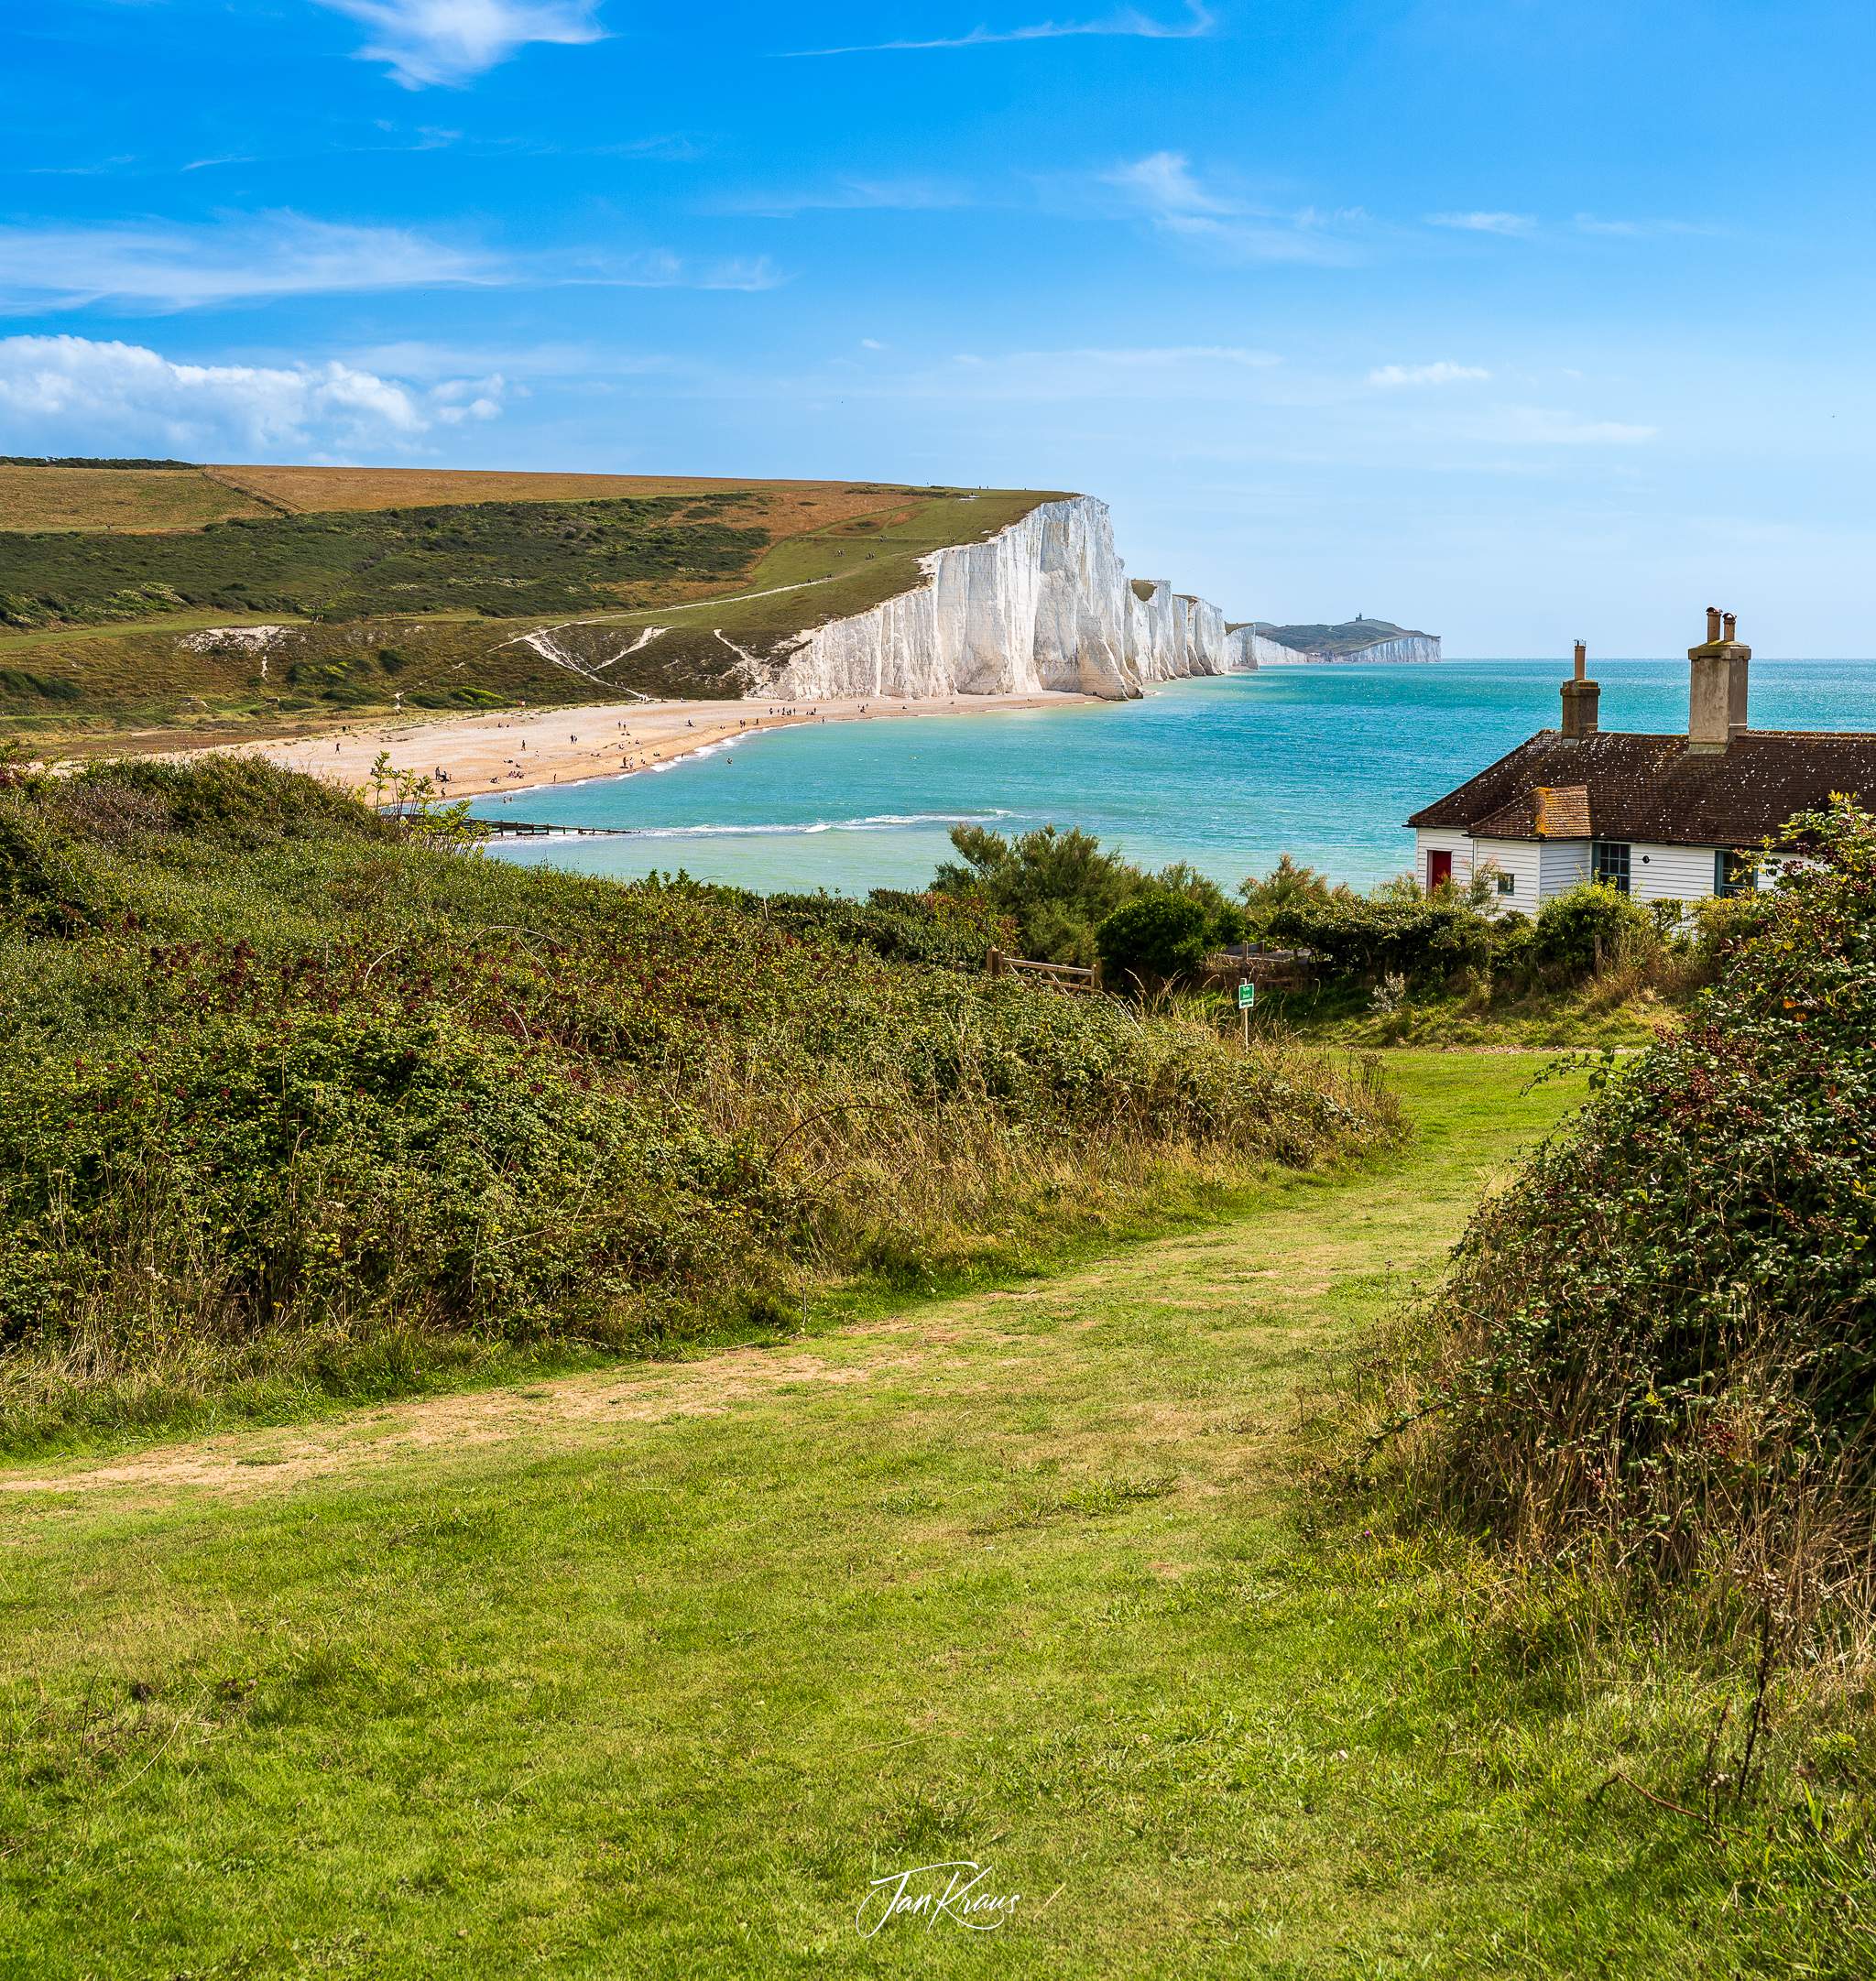 Coastguard Cottages overlooking the Seven Sisters cliffs, East Sussex, England, UK